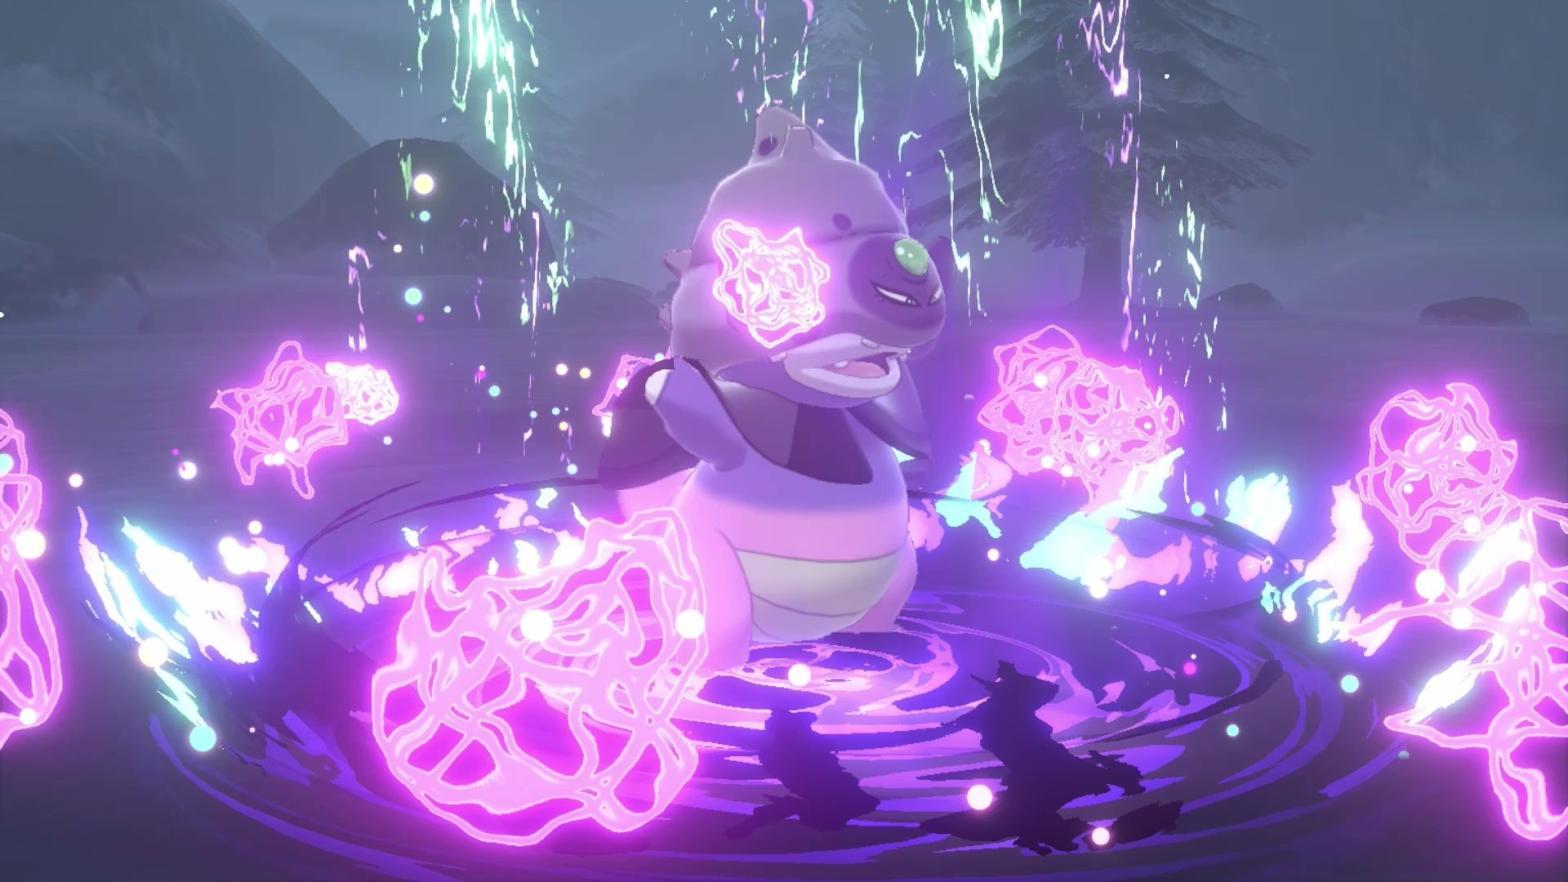 A Galarian Slowking using move Eerie Spell to hurt an opponent. (Image: Nintendo)